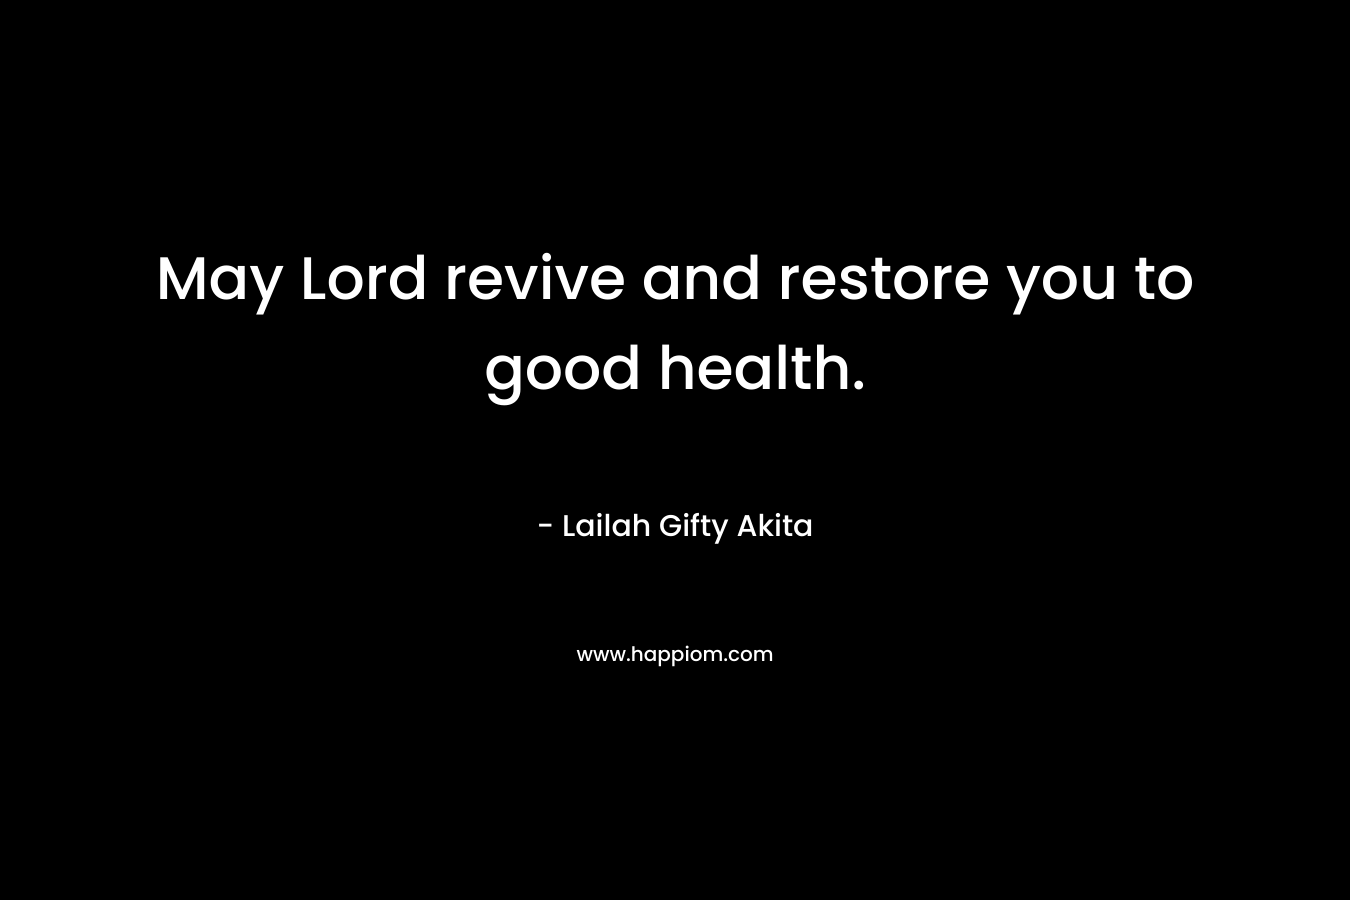 May Lord revive and restore you to good health.